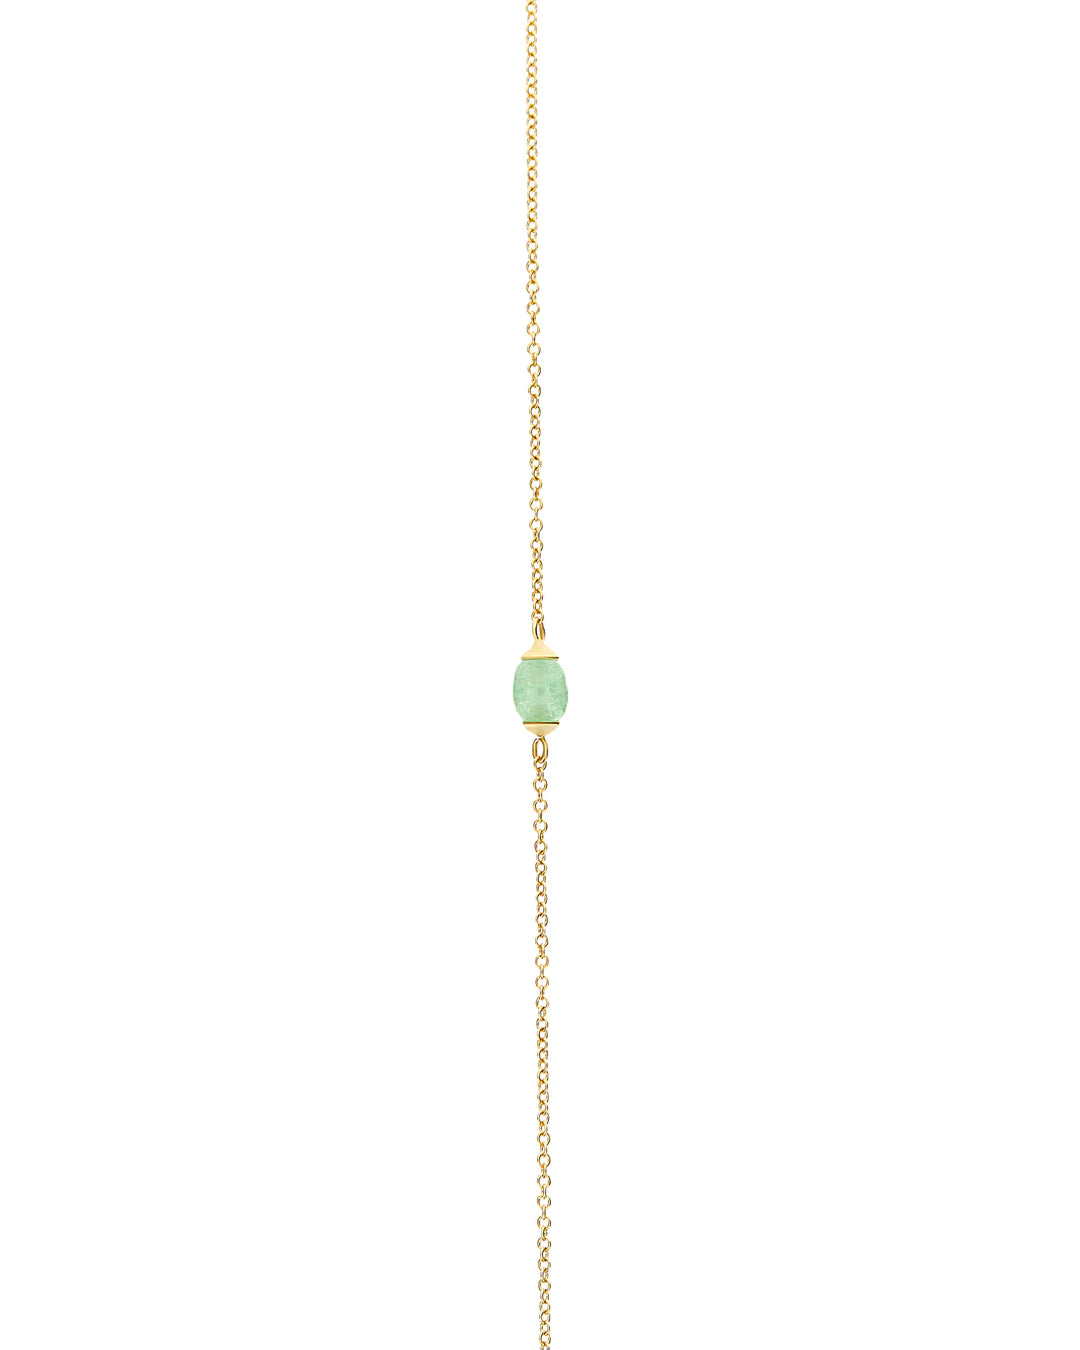 "AMAZONIA" GOLD AND GREEN AVENTURINE NECKLACE (SMALL)